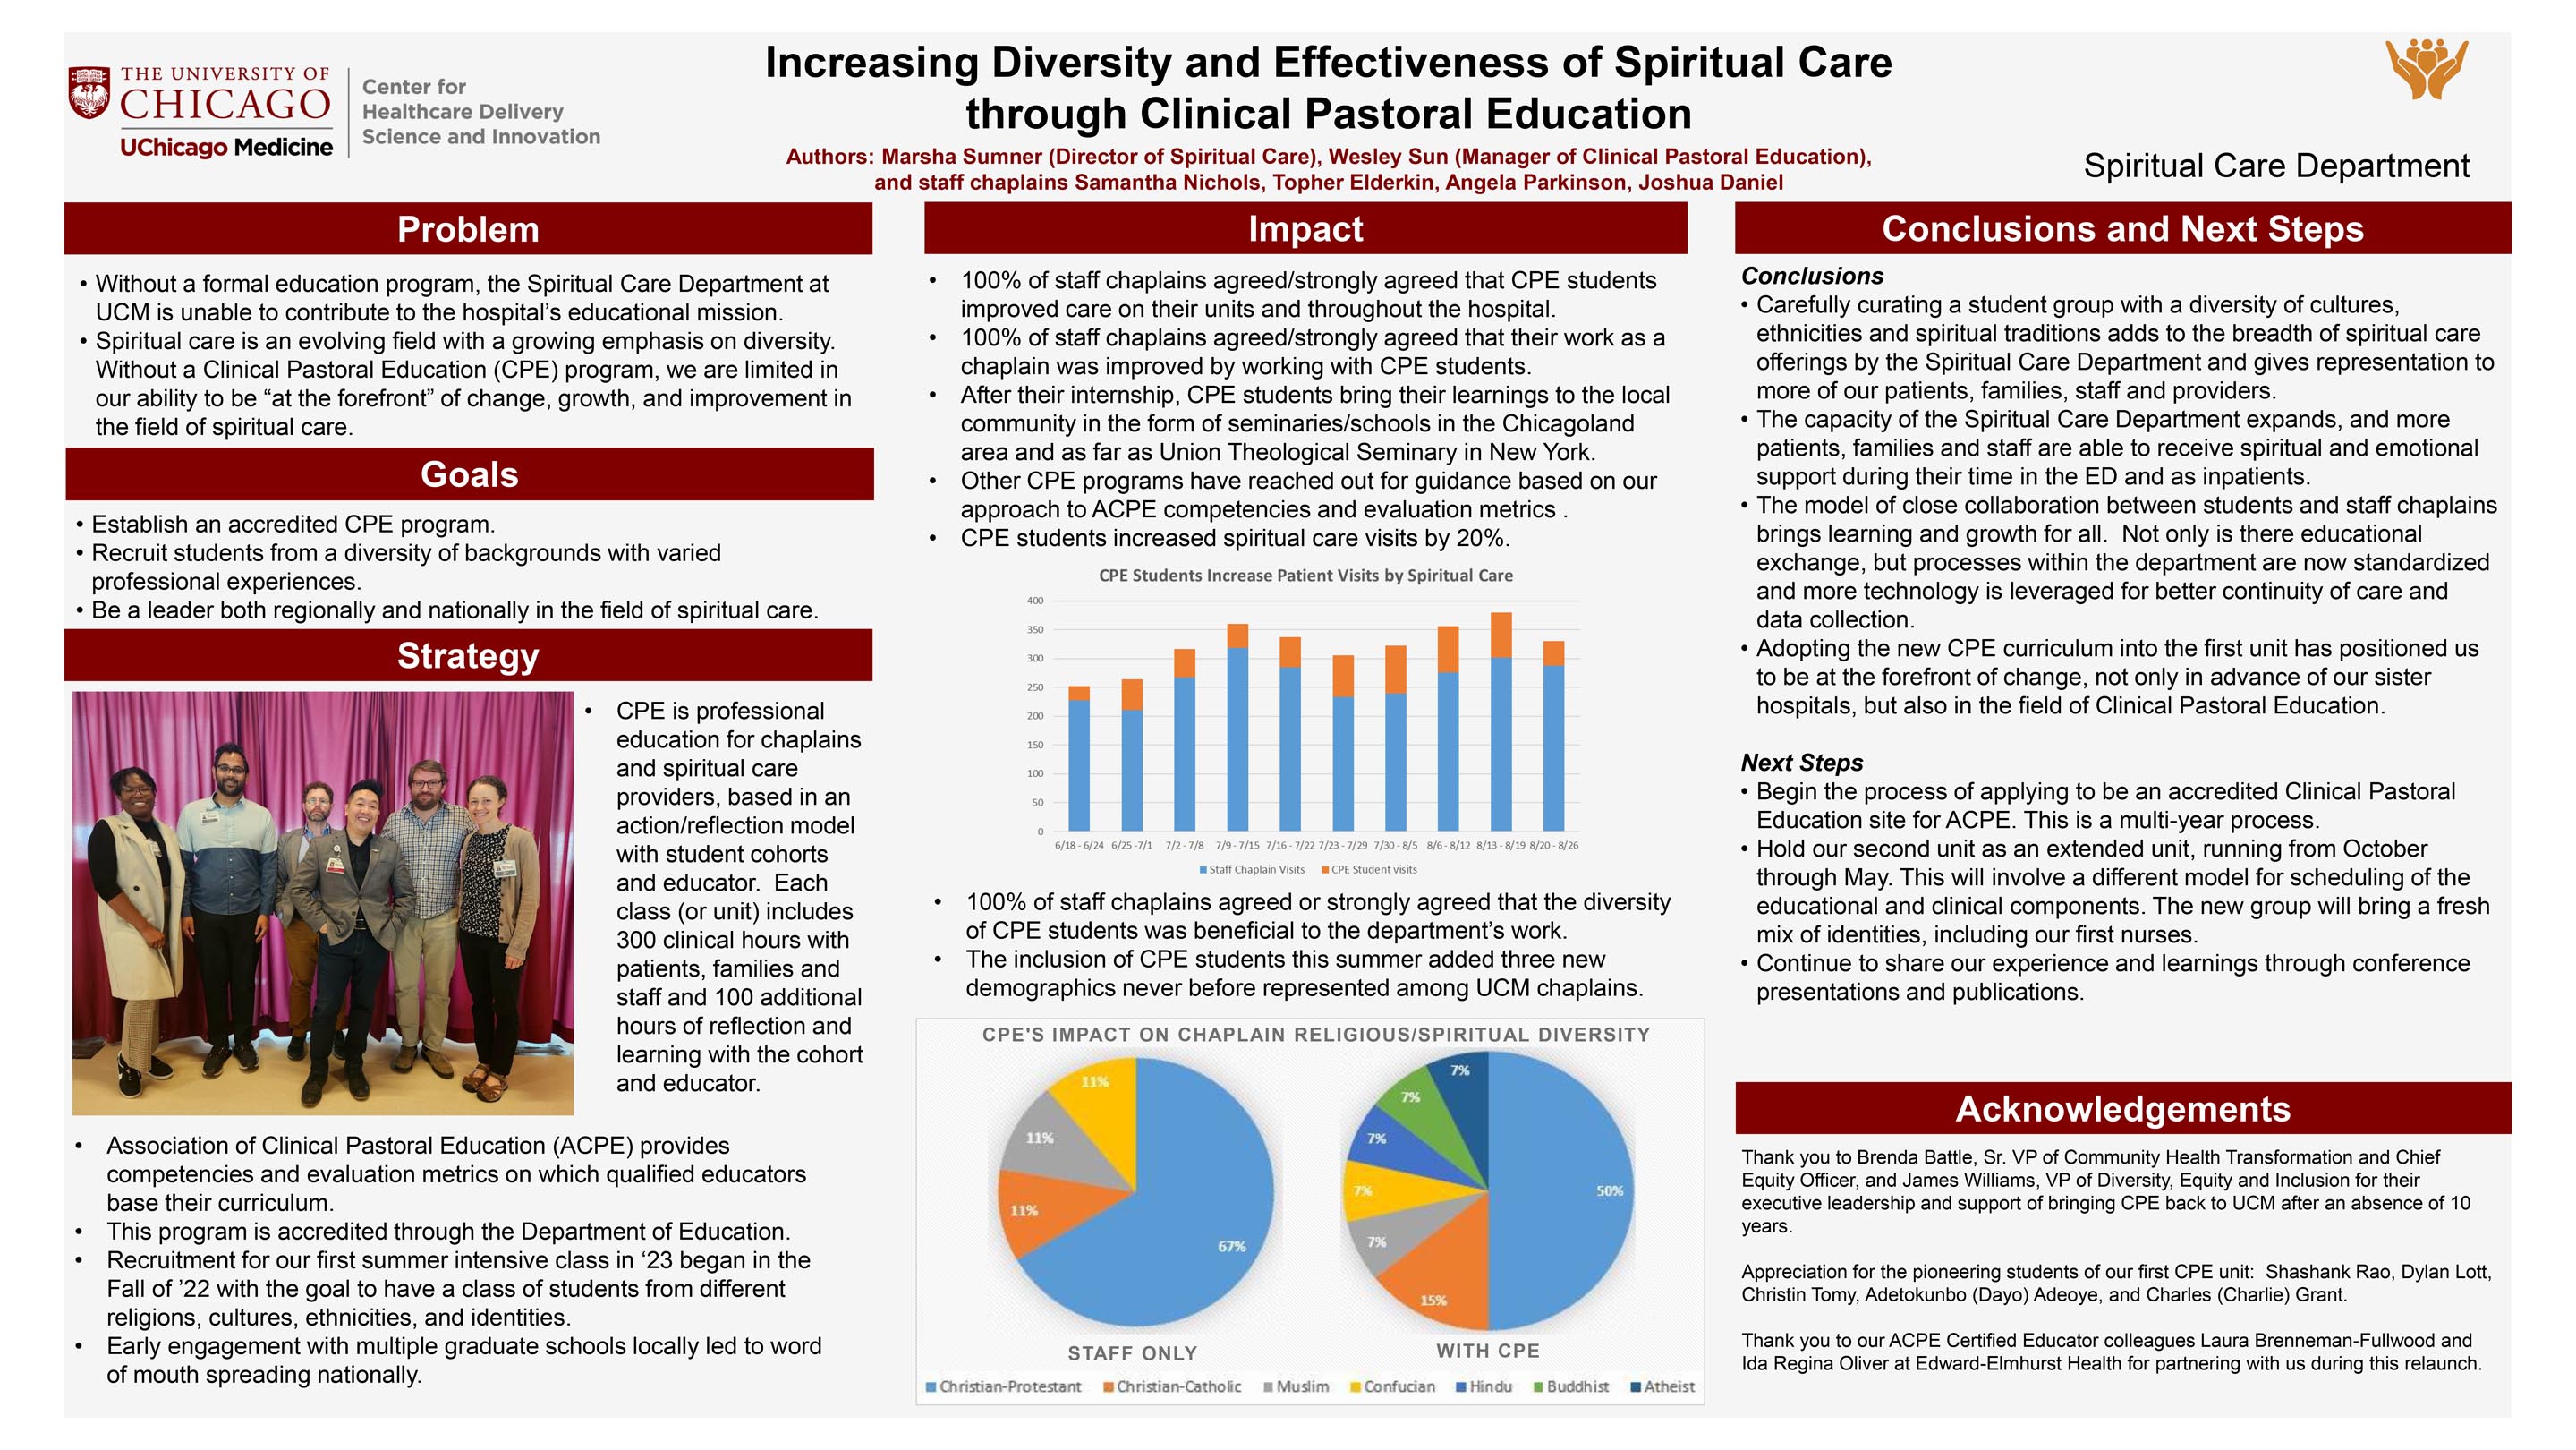 SUMNER_Increasing Diversity and Effectiveness of Spiritual Care through Clinical Pastoral Education